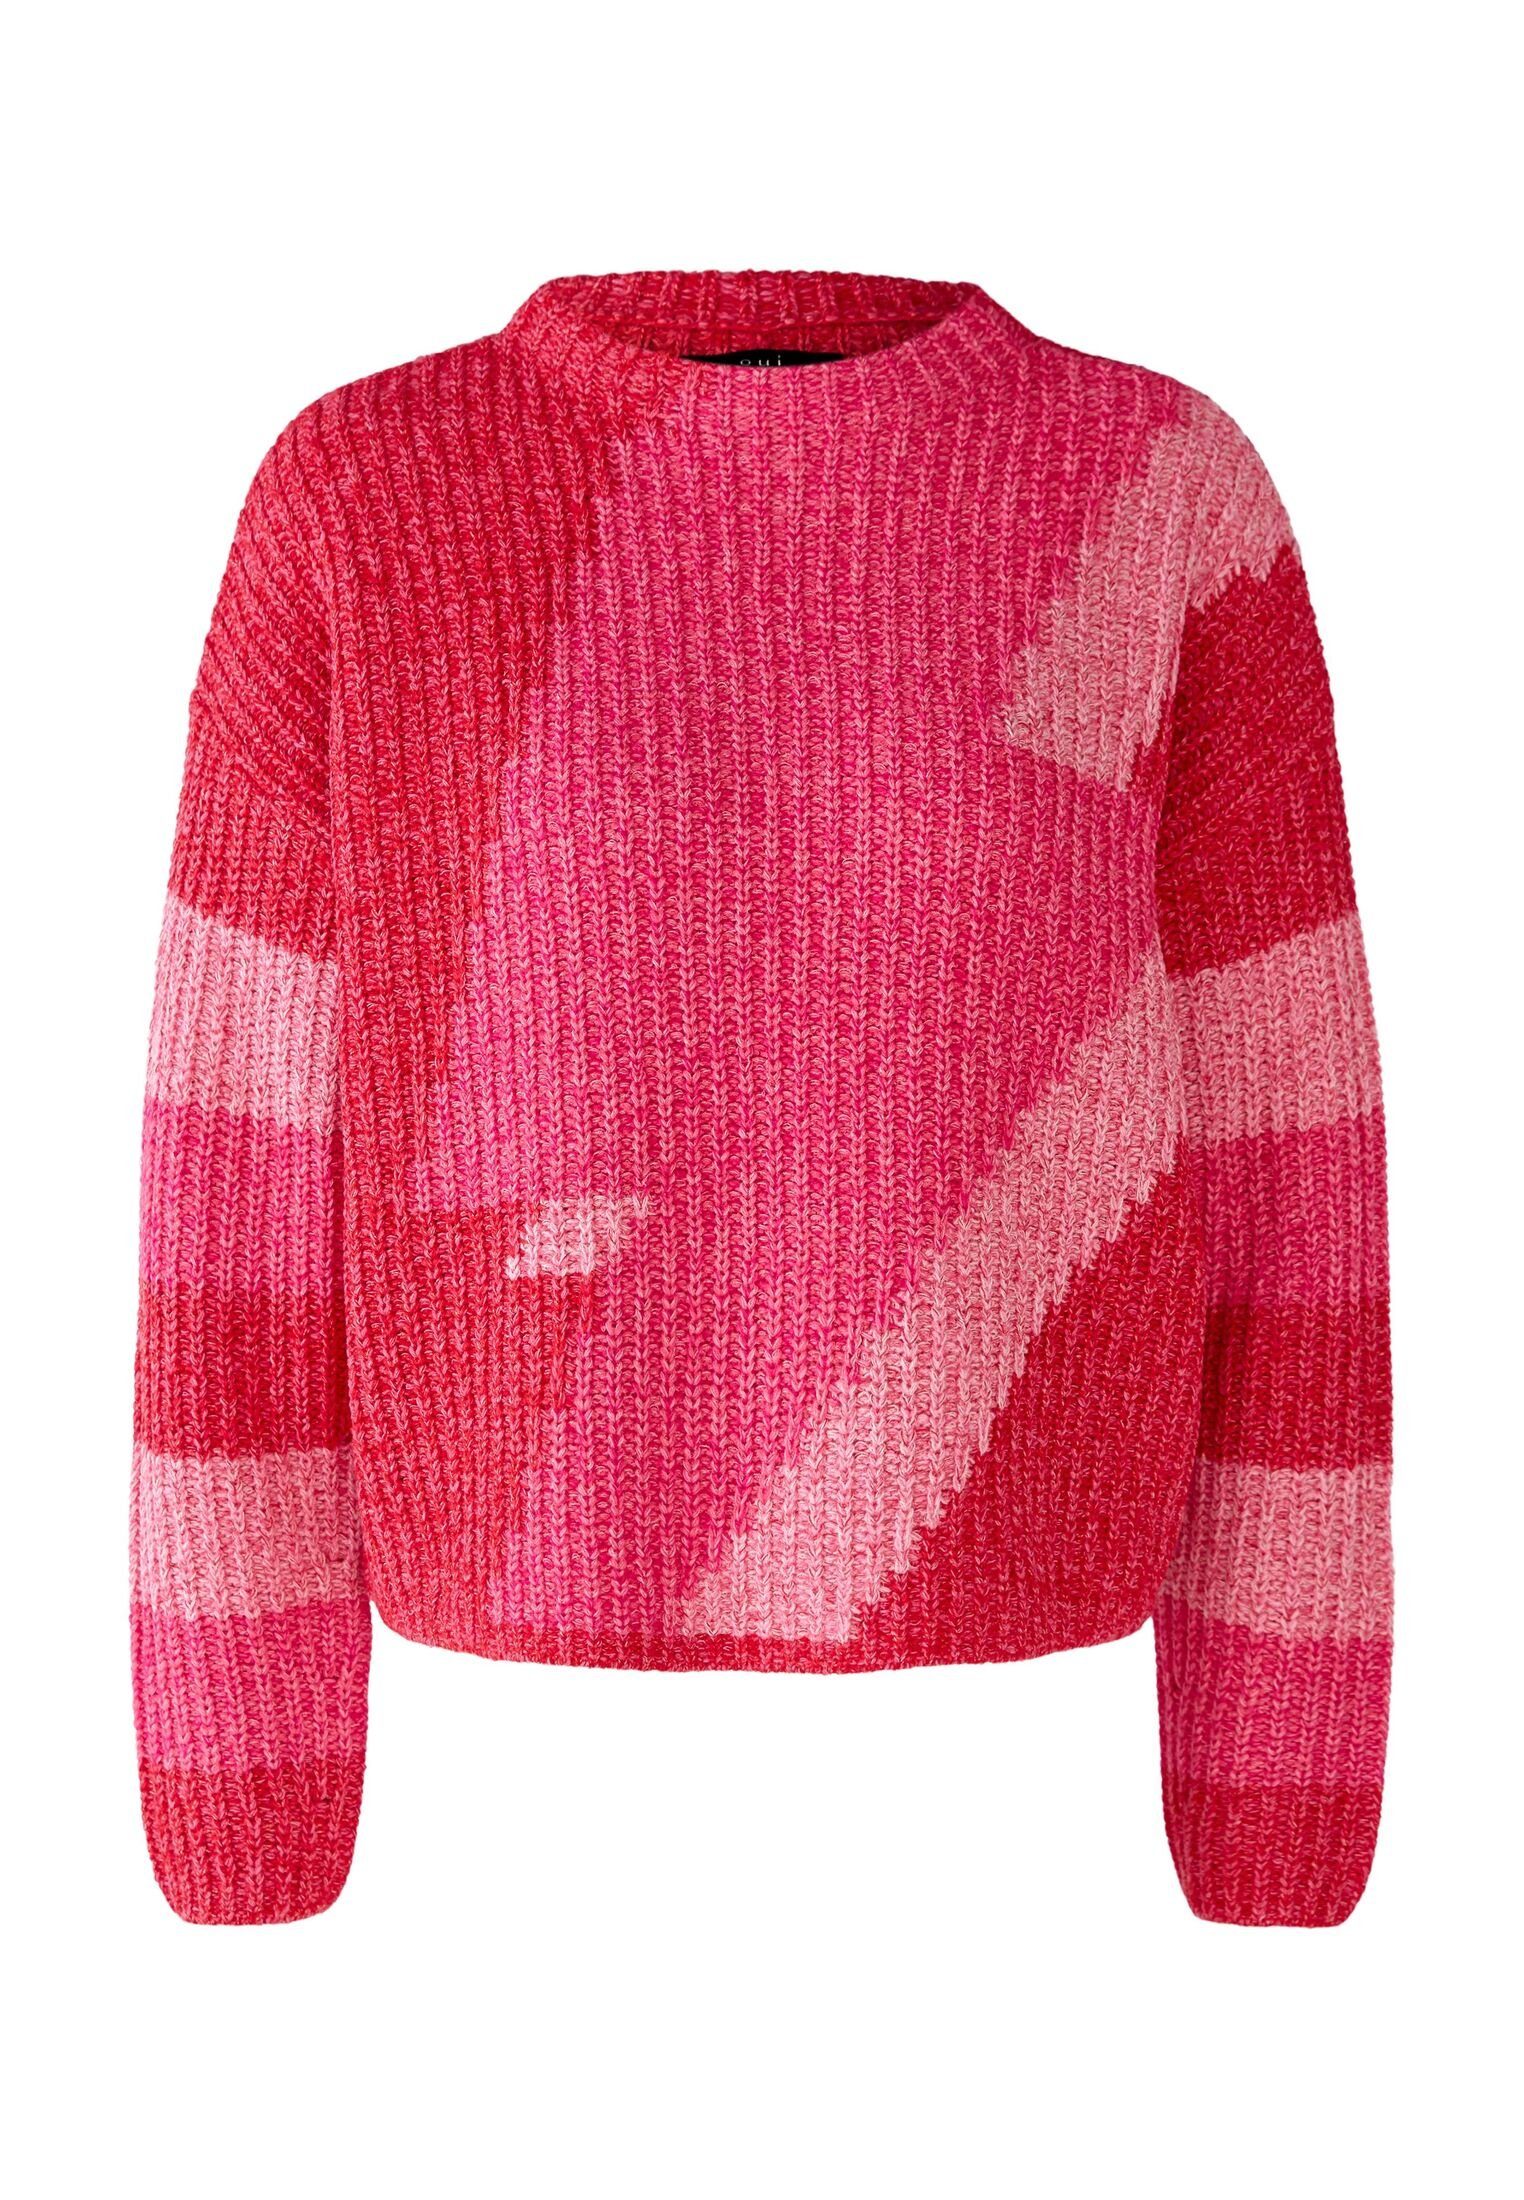 Oui Set Oui Strickpullover Pullover Baumwollmischung rot | 